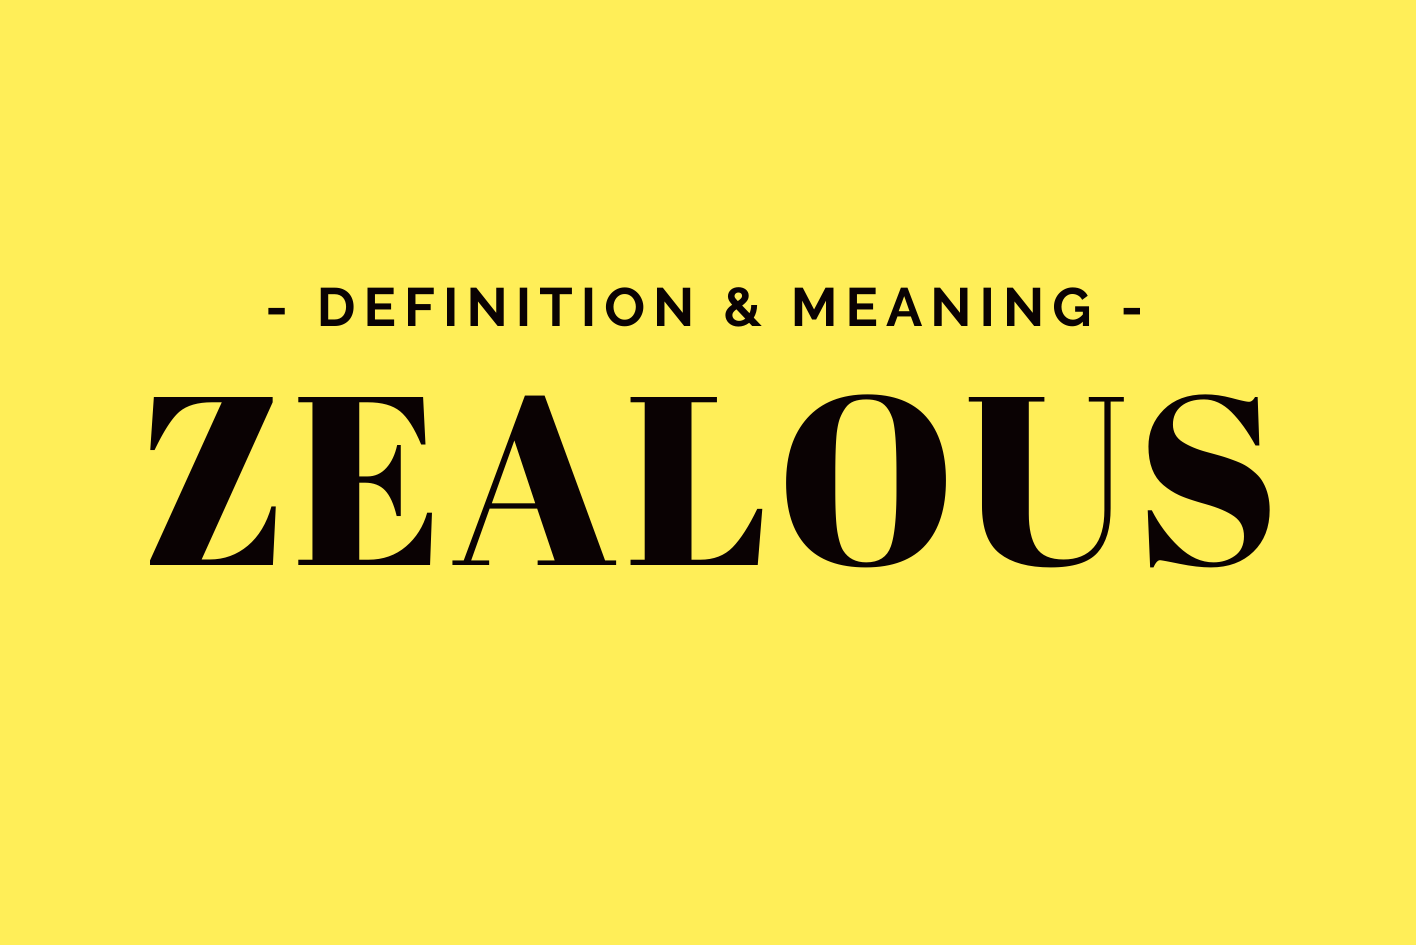 An image saying Zealous Definition and Meaning